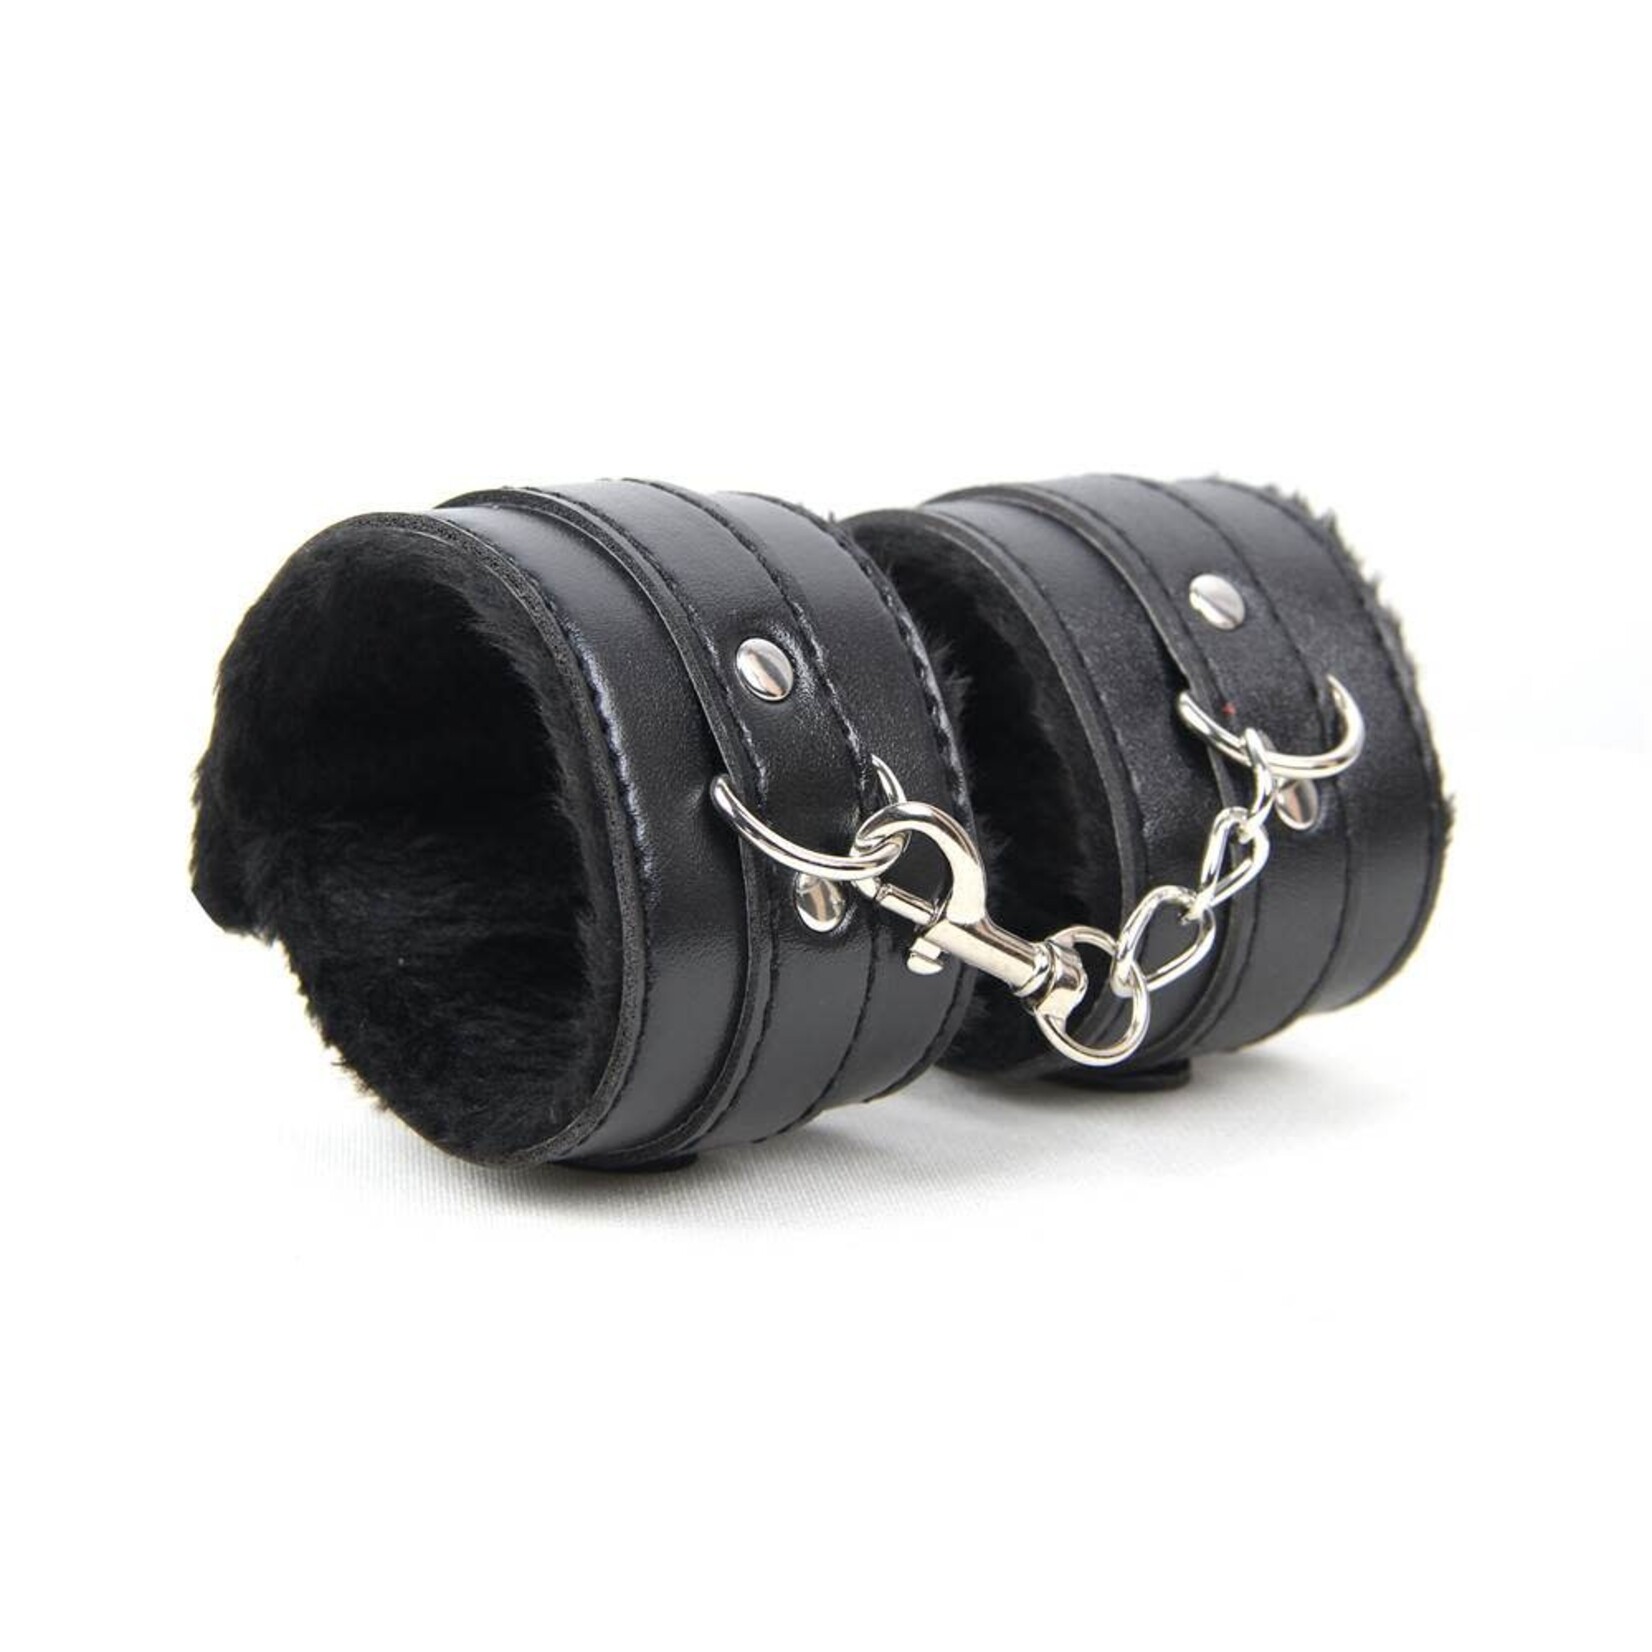 OH YEAH! -  BLACK SM BONDAGE SEX LEATHER HANDCUFFS ONE SIZE